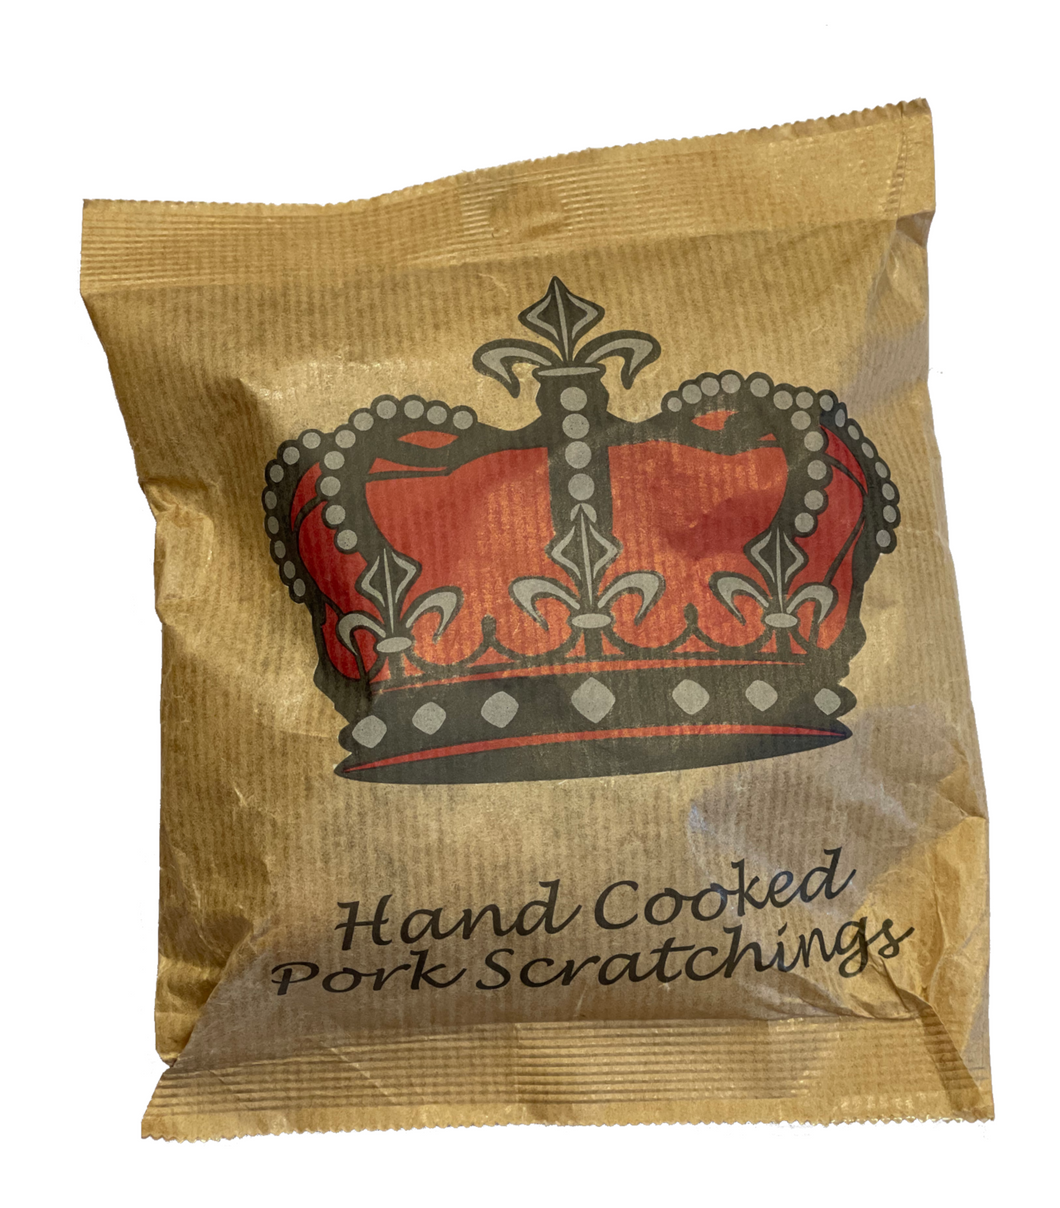 Crown Hand Cooked Pork Scratchings - 100g